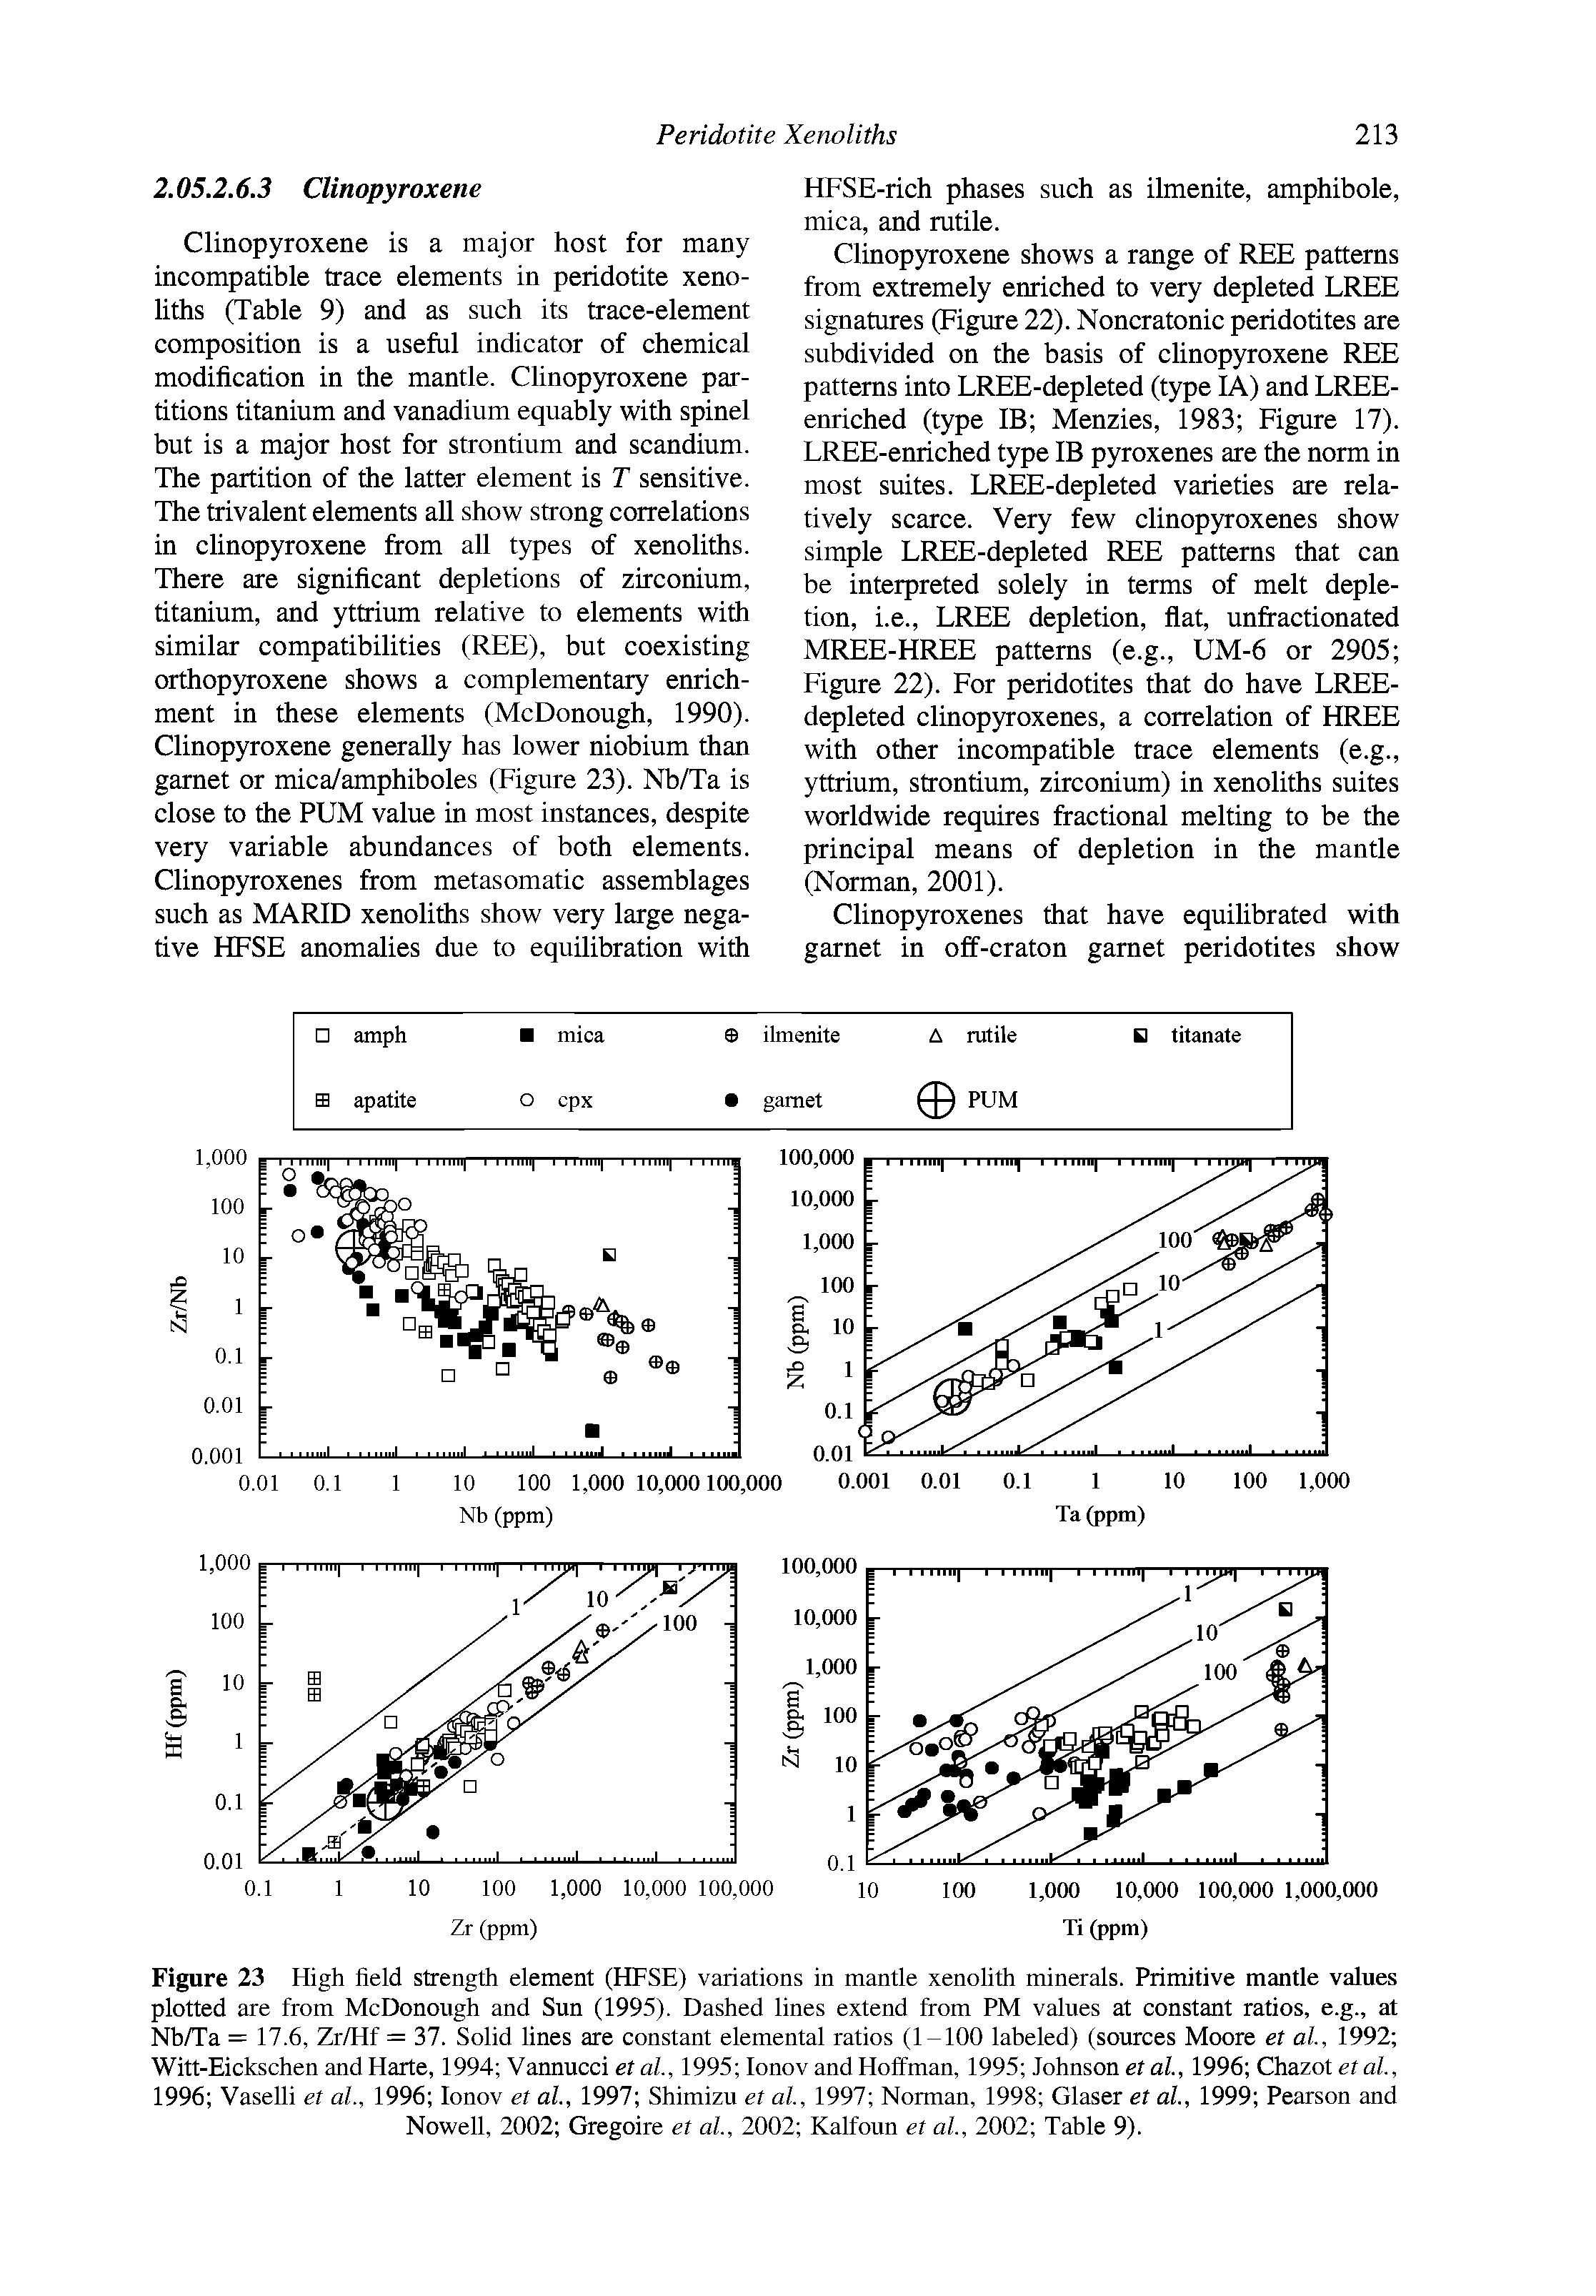 Figure 23 High field strength element (HFSE) variations in mantle xenolith minerals. Primitive mantle values plotted are from McDonough and Sun (1995). Dashed lines extend from PM values at constant ratios, e.g., at Nb/Ta = 17.6, Zr/Hf = 37. Solid lines are constant elemental ratios (1-100 labeled) (sources Moore et ah, 1992 Witt-Eickschen and Harte, 1994 Vannucci etal, 1995 Ionov and Hoffman, 1995 Johnson et a/., 1996 Chazot era/., 1996 Vaselli et al., 1996 Ionov et ah, 1997 Shimizu et al, 1997 Norman, 1998 Glaser et ah, 1999 Pearson and Nowell, 2002 Gregoire et al., 2002 Kalfoun et al., 2002 Table 9).